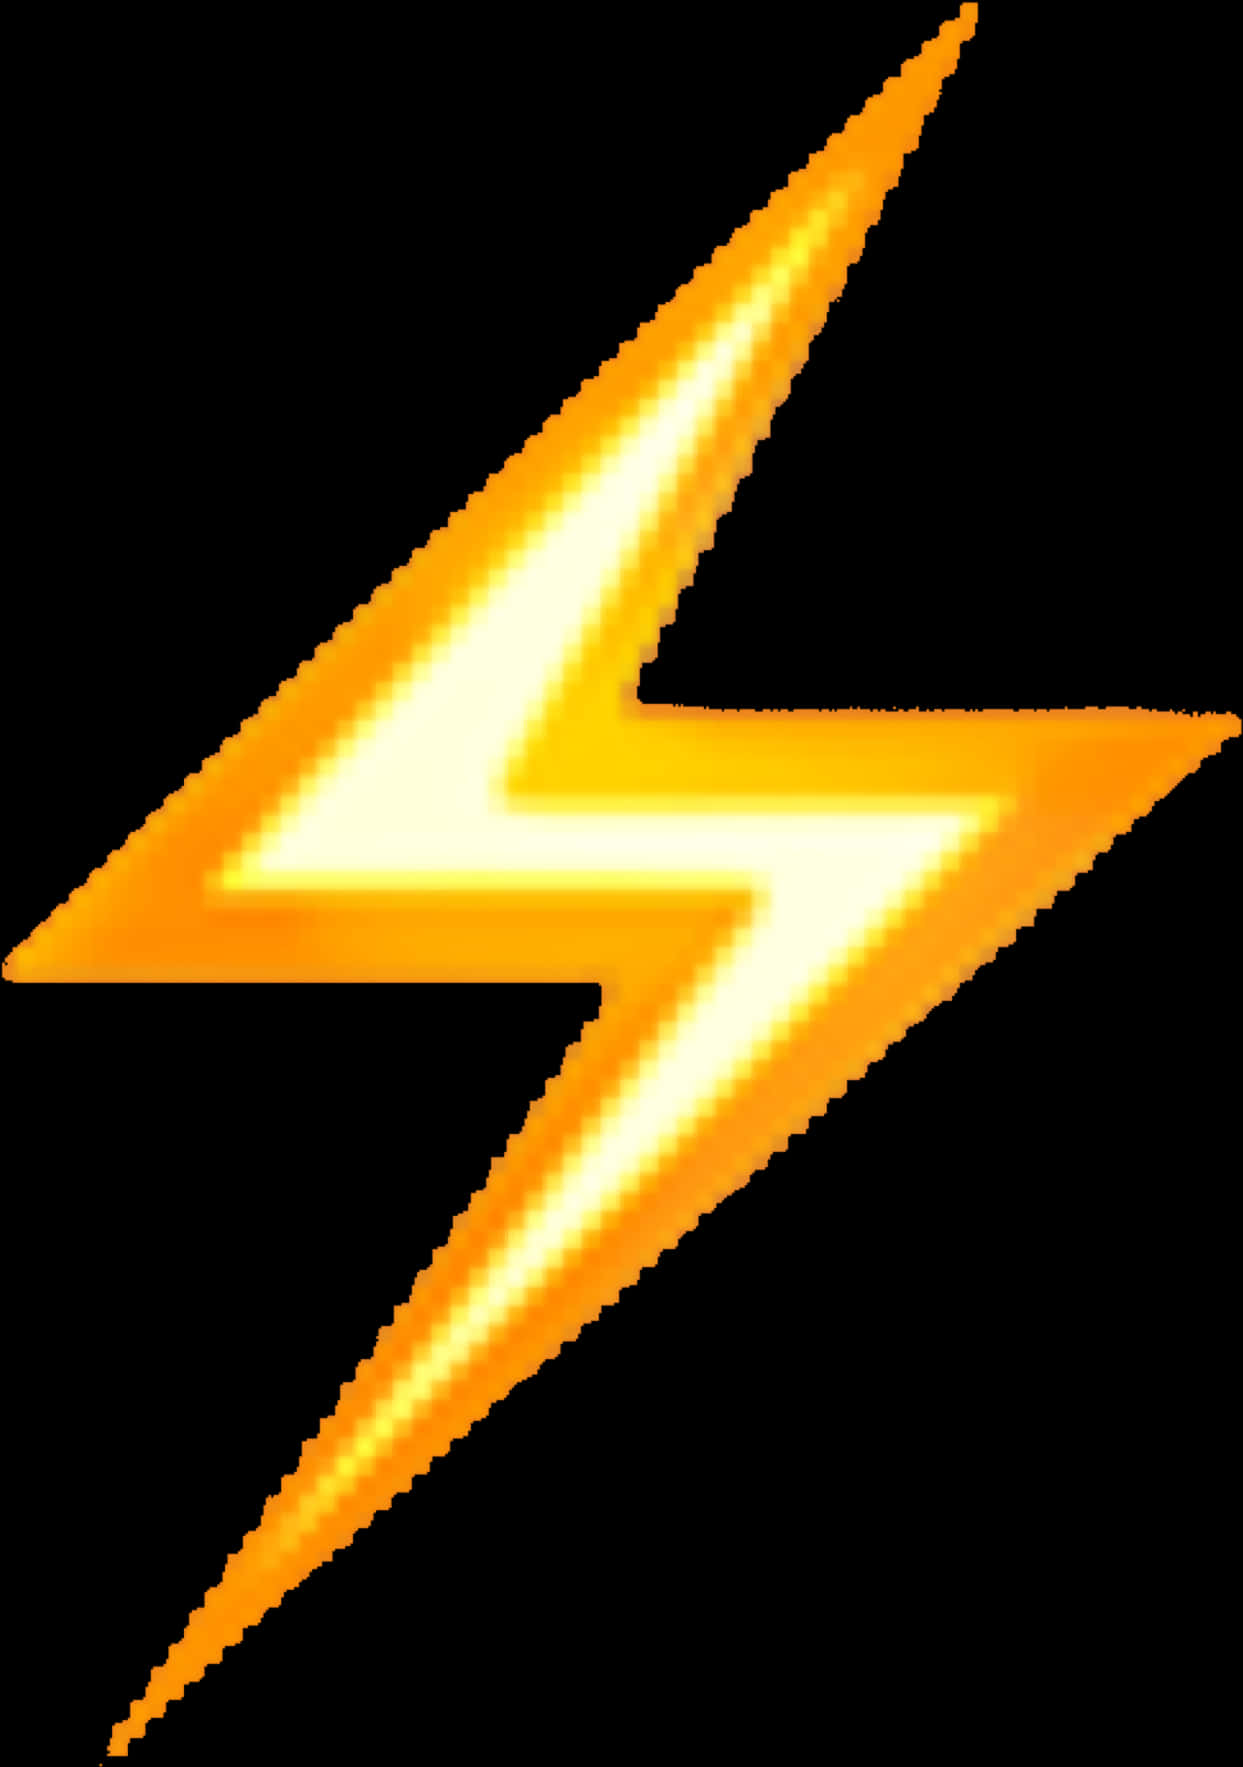 A Yellow Lightning Bolt On A Black Background PNG